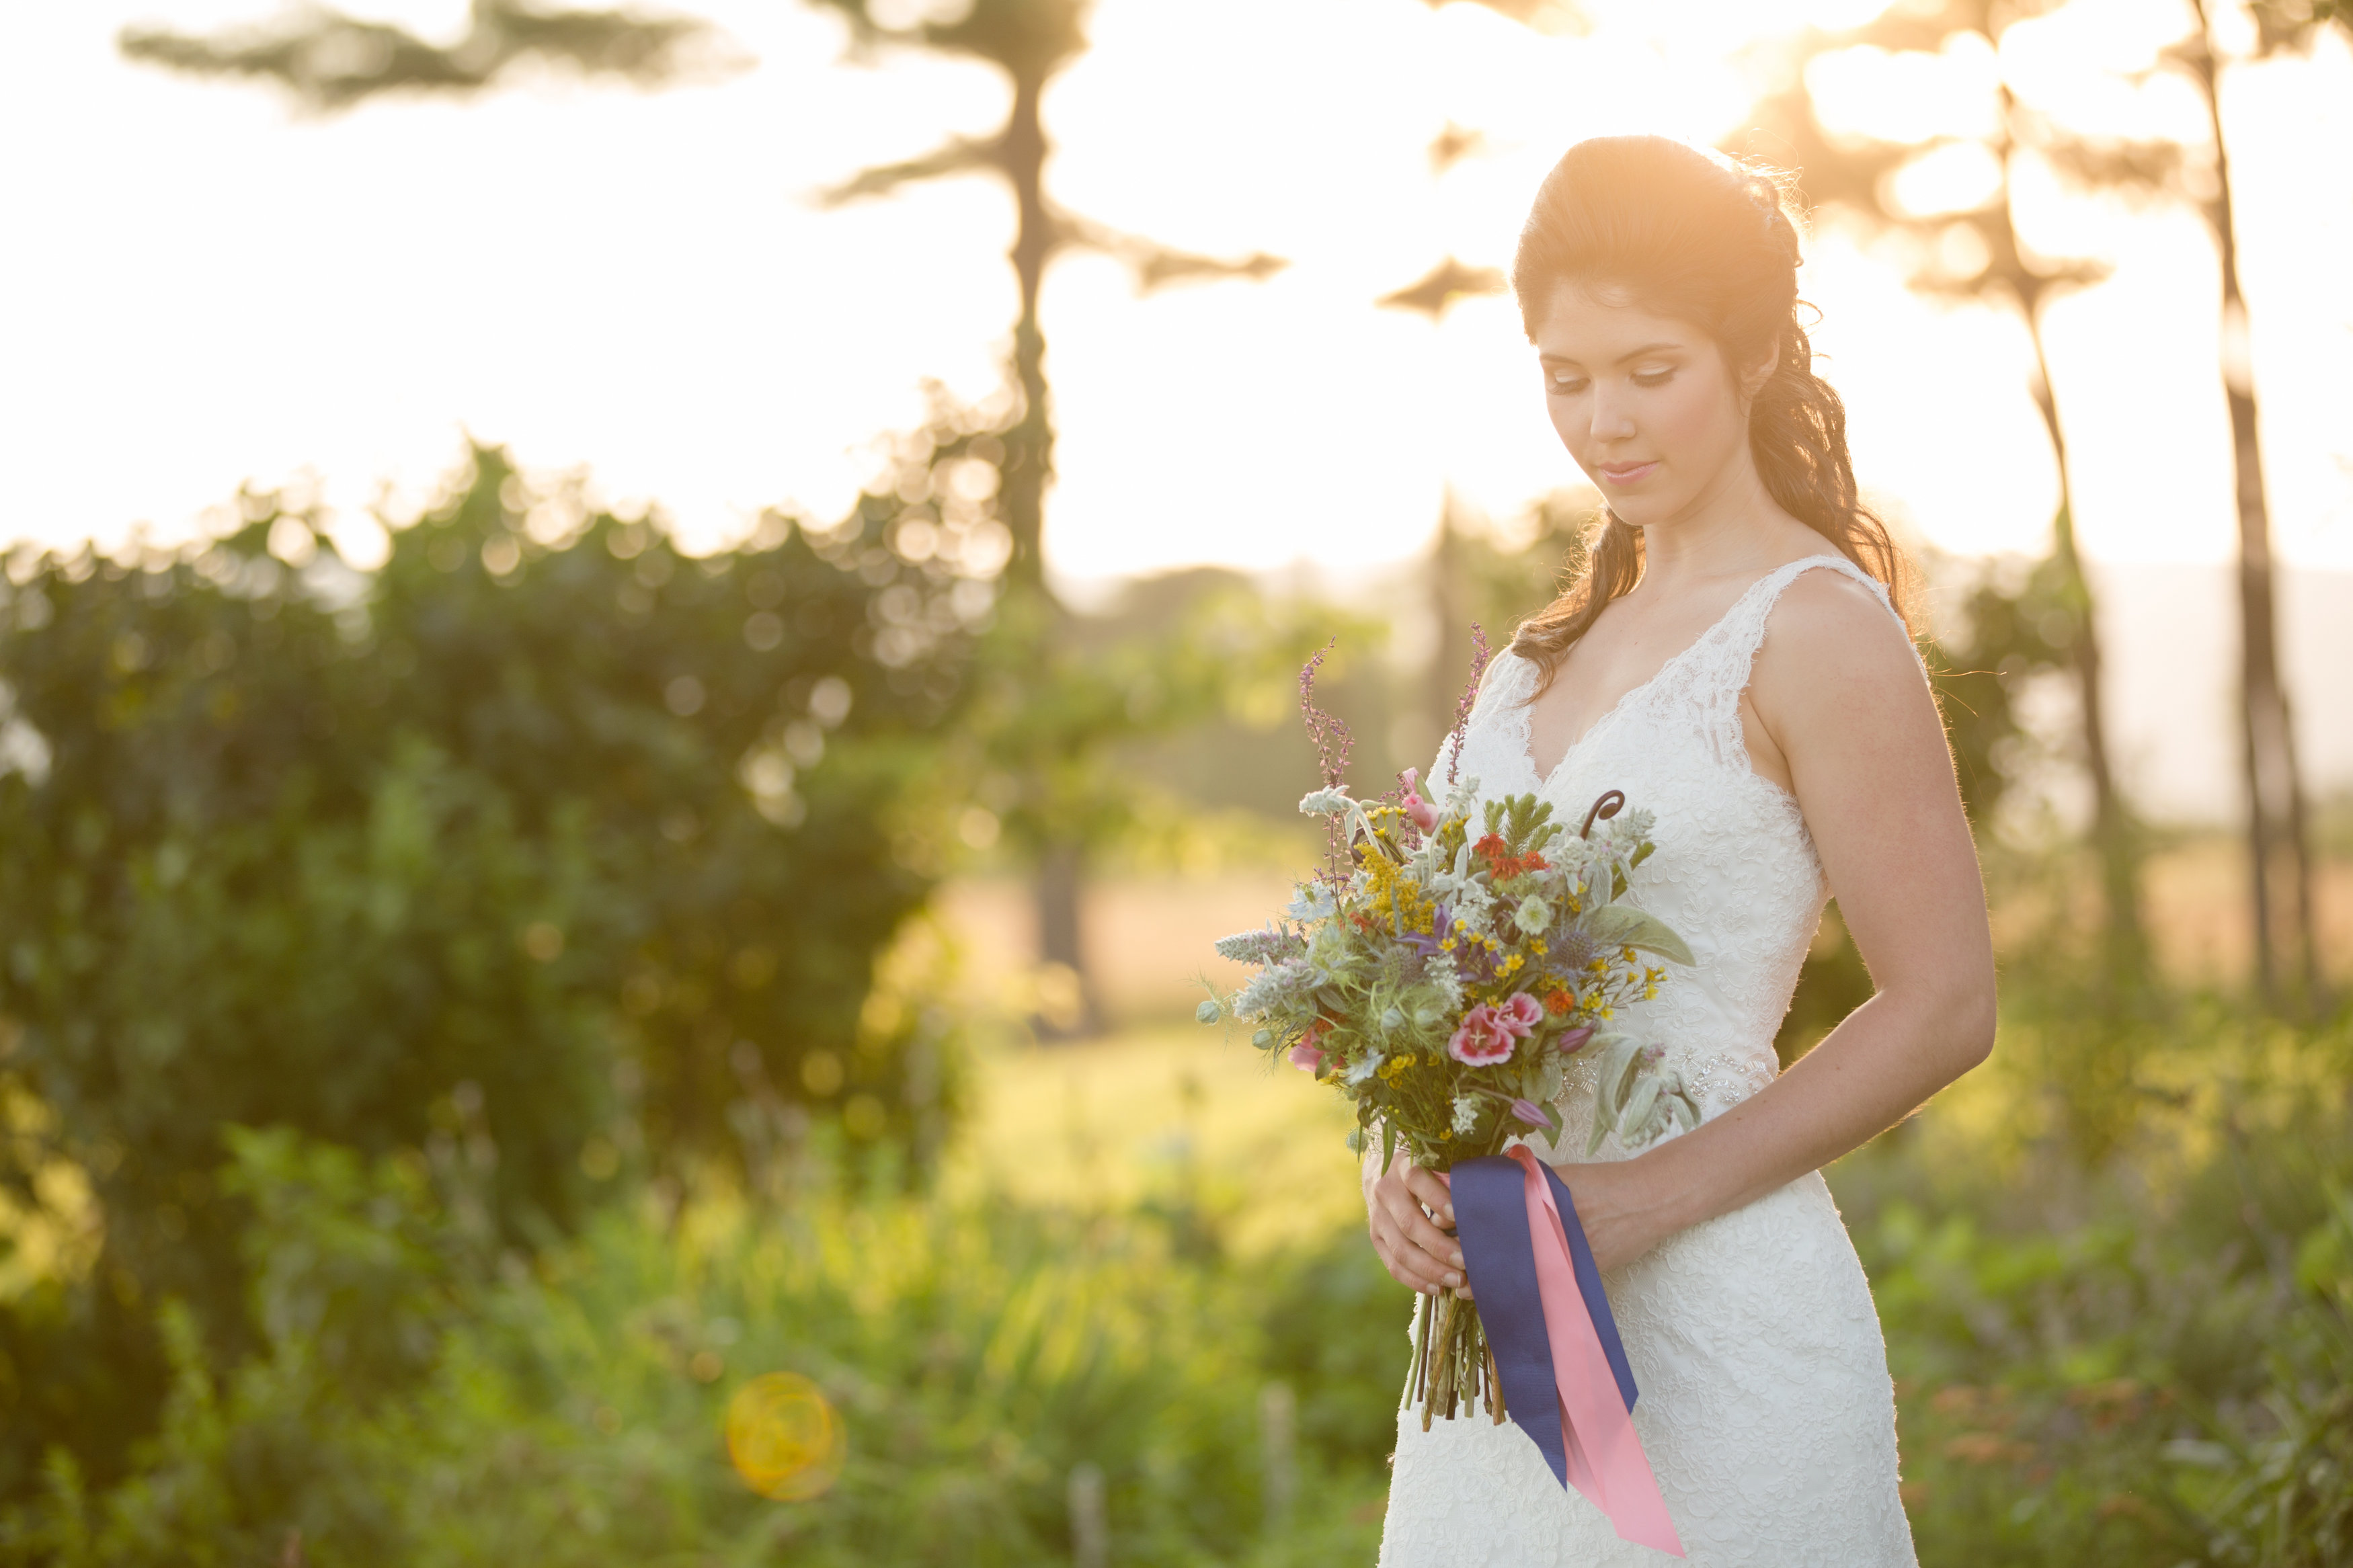 5 Tips for Planning Your Eco-Friendly Farm Wedding